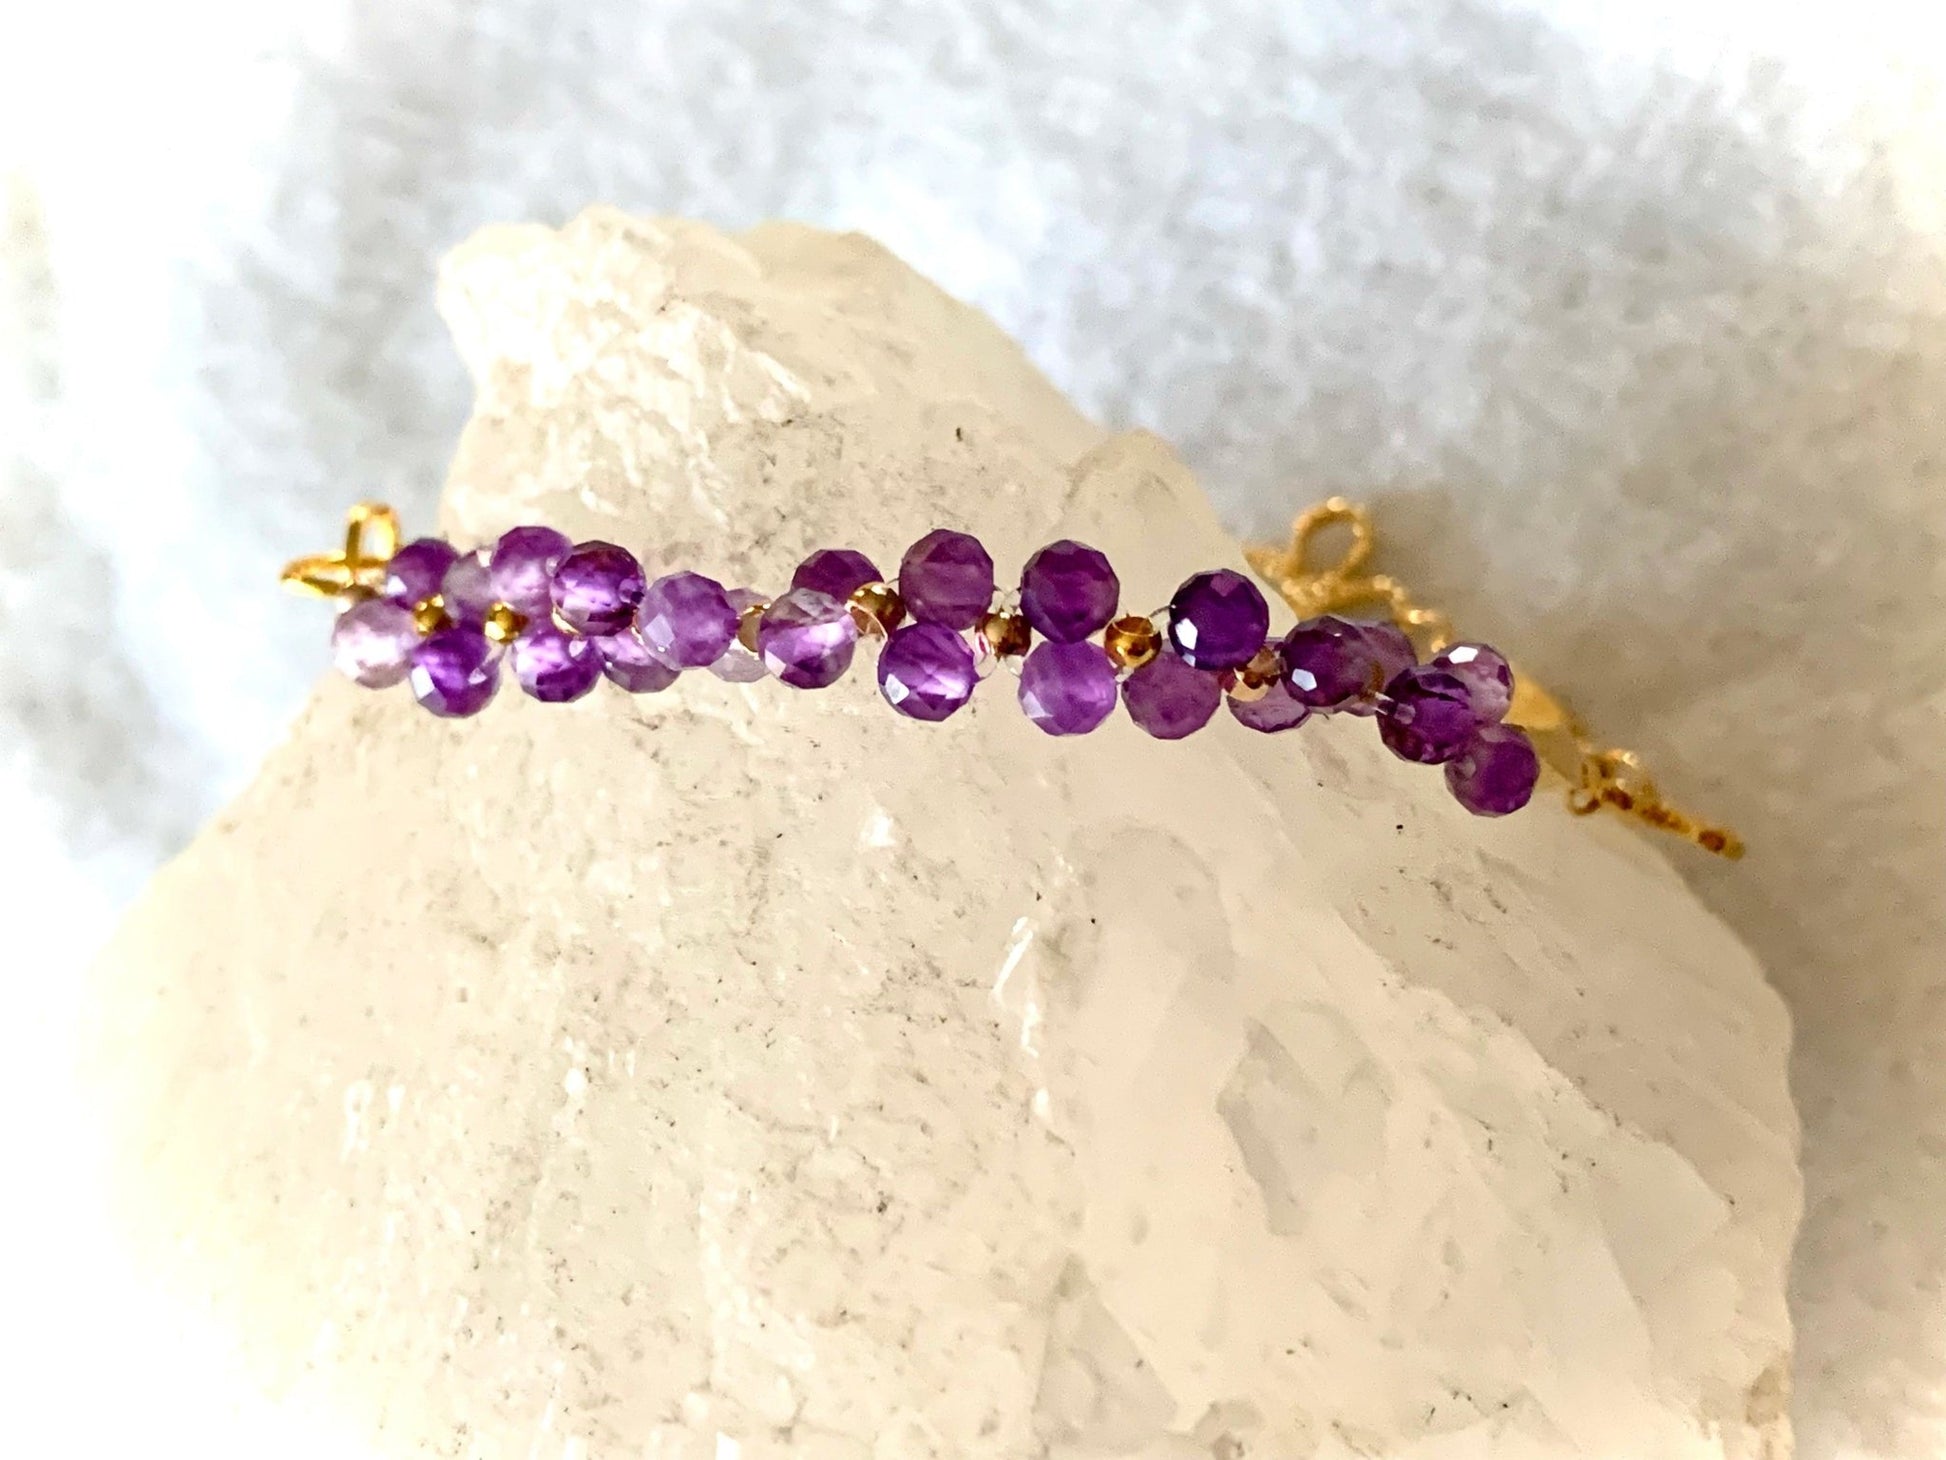 🔴Sold🔴 Kendra Handmade Genuine Faceted Amethyst Bracelet with Gold Plated Flower Chain - Born Mystics